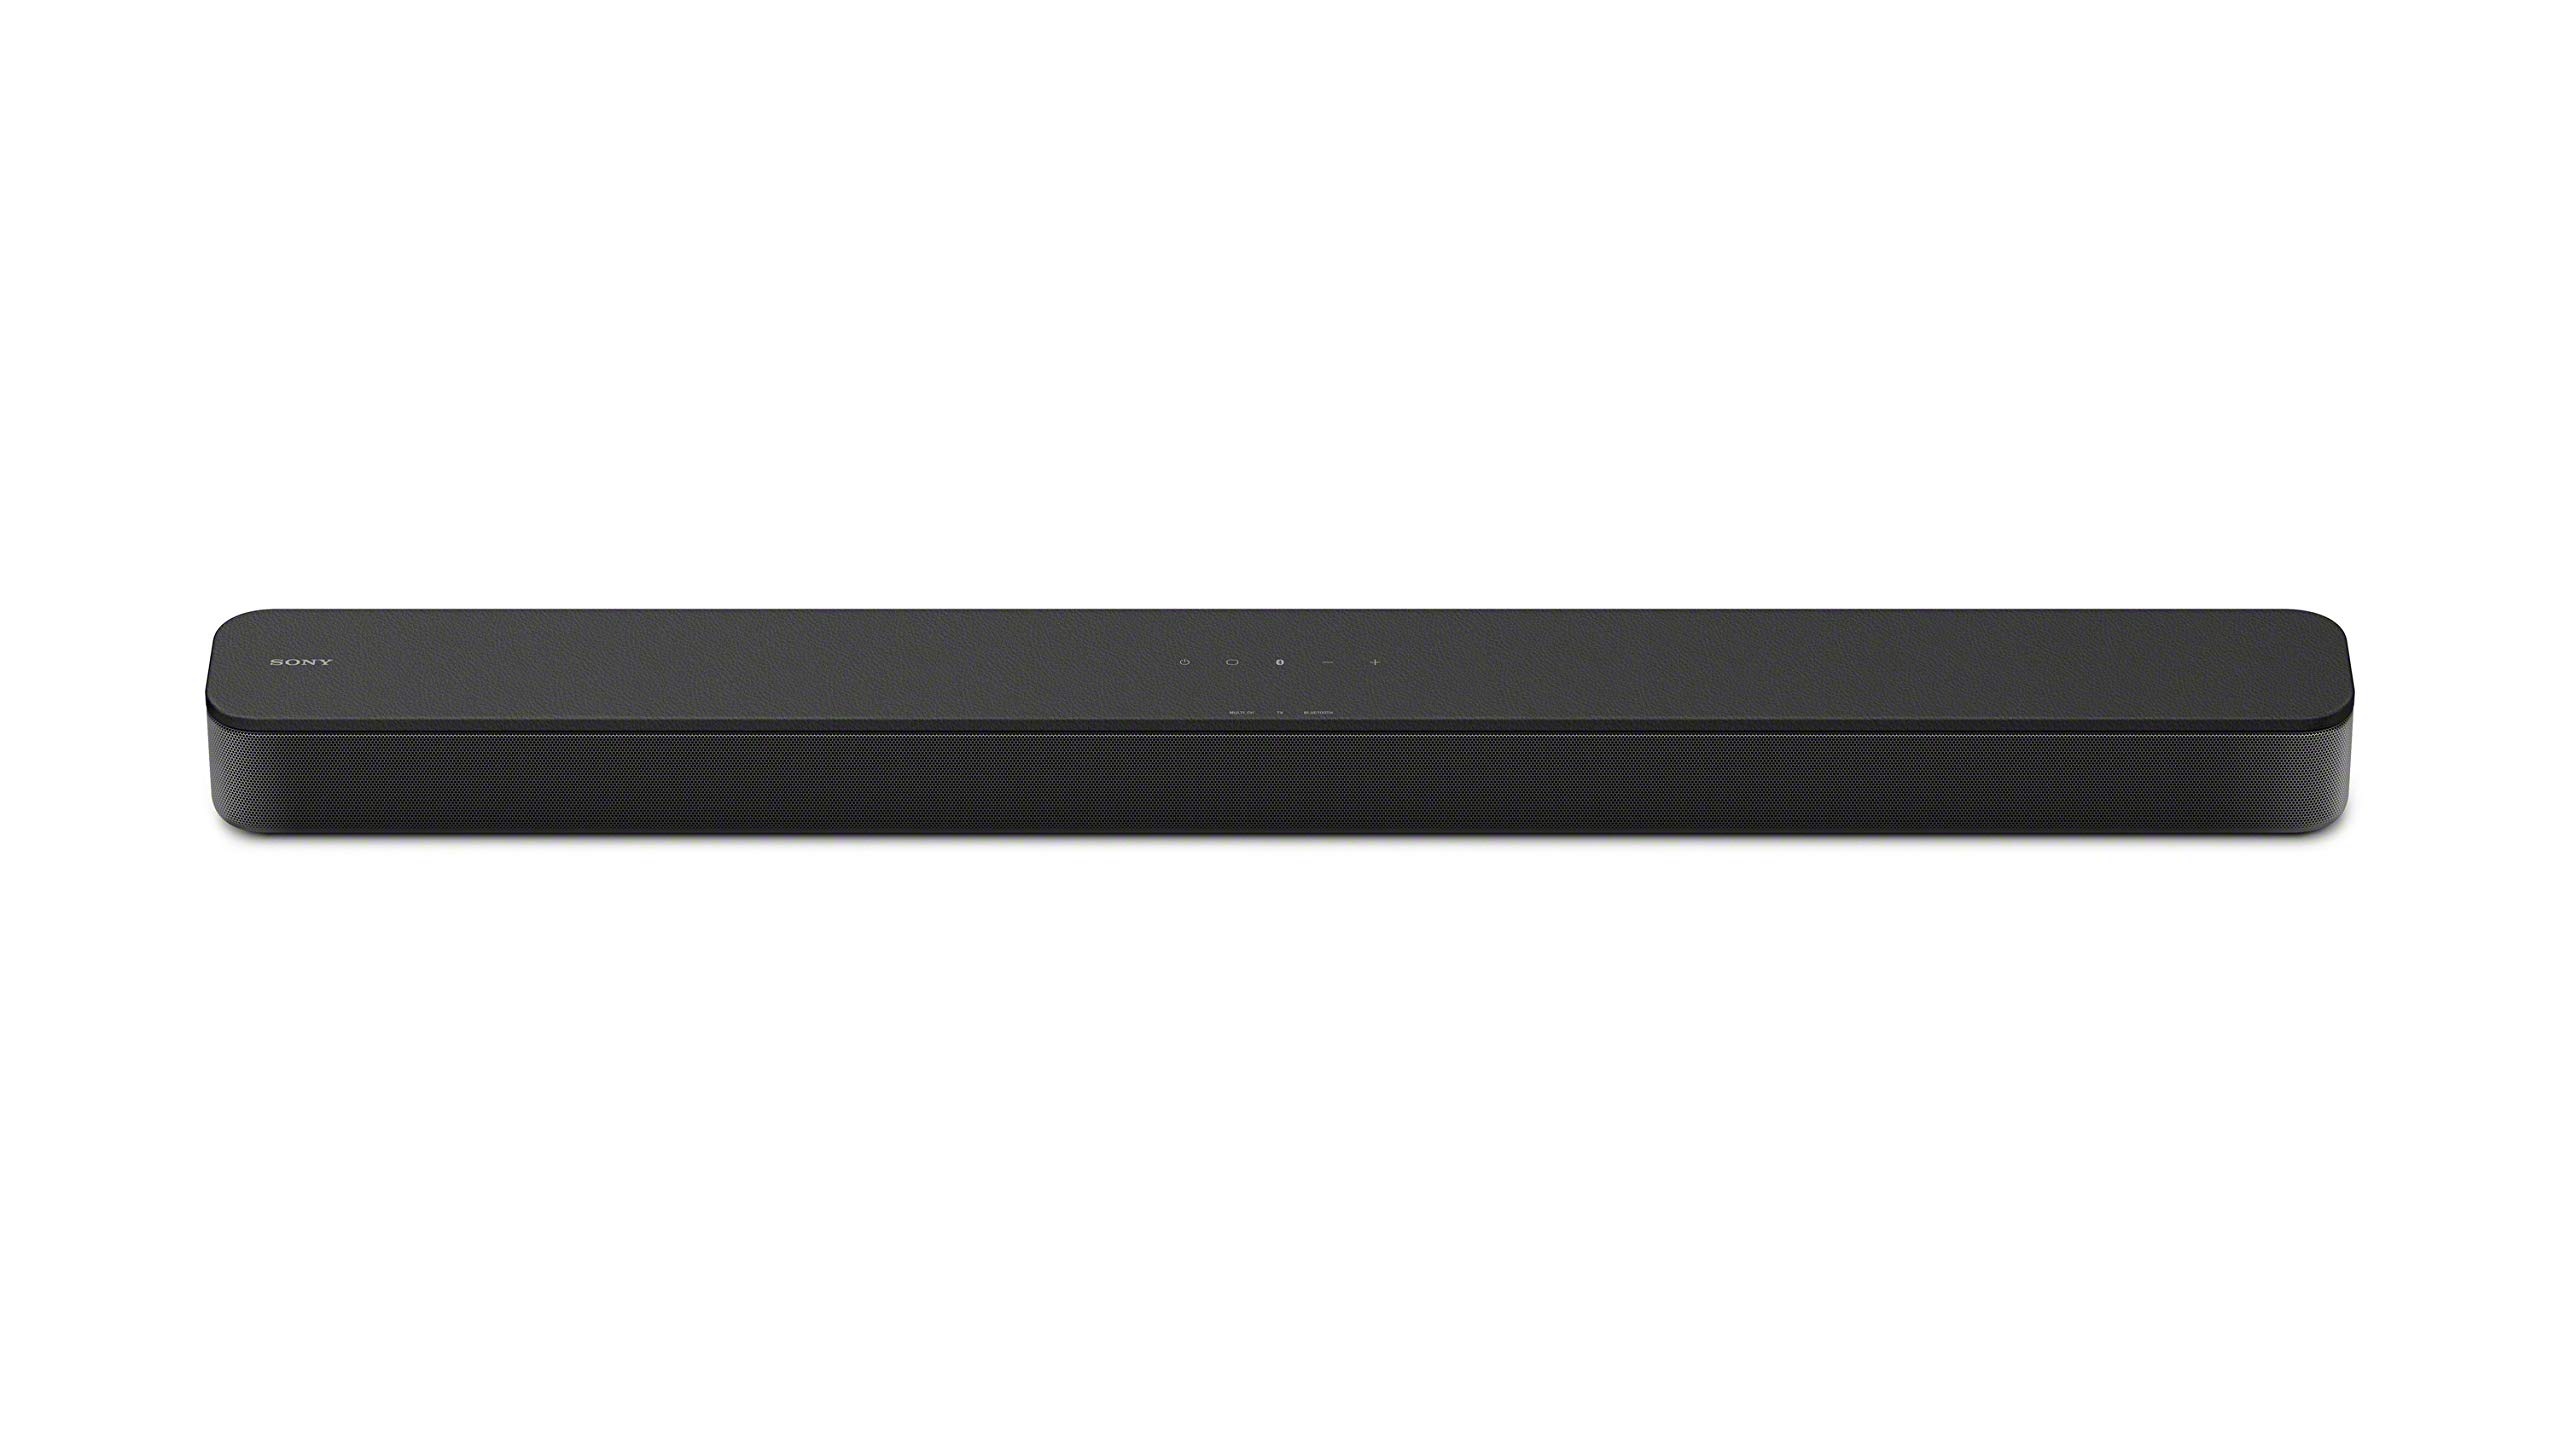 Sony HT-S350 Soundbar with Wireless Subwoofer: S350 2.1ch Sound Bar and Powerful Subwoofer - Home Theater Surround Sound Speaker System for TV - Blutooth and HDMI Arc Compatible Bar Black